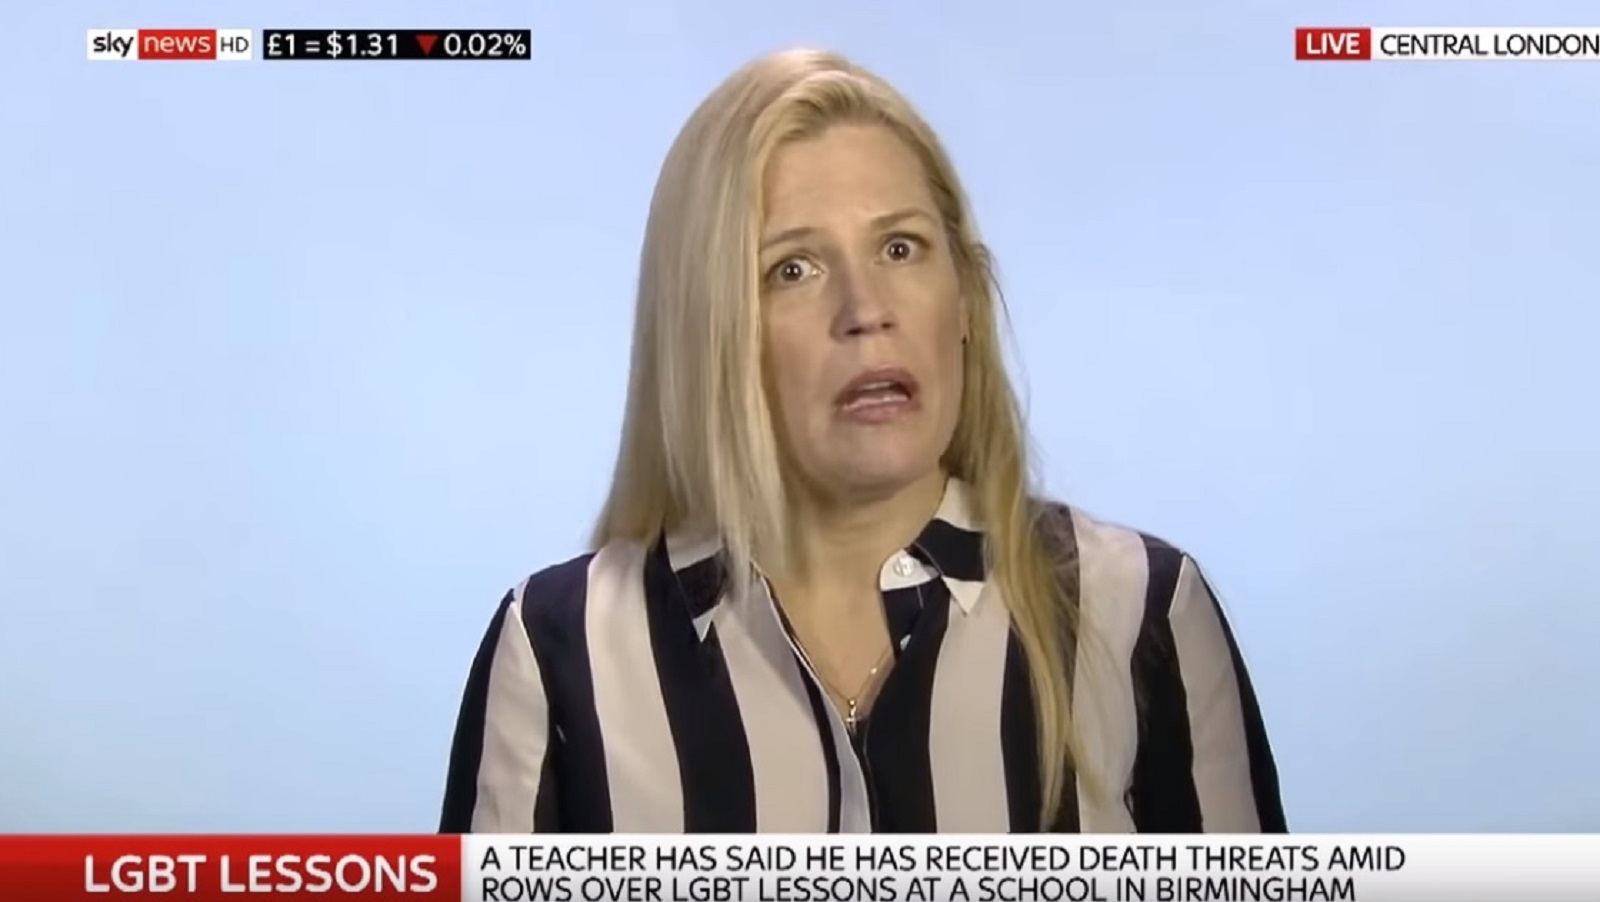 Caroline Farrow appearing on Sky News to oppose LGBT+ inclusive education